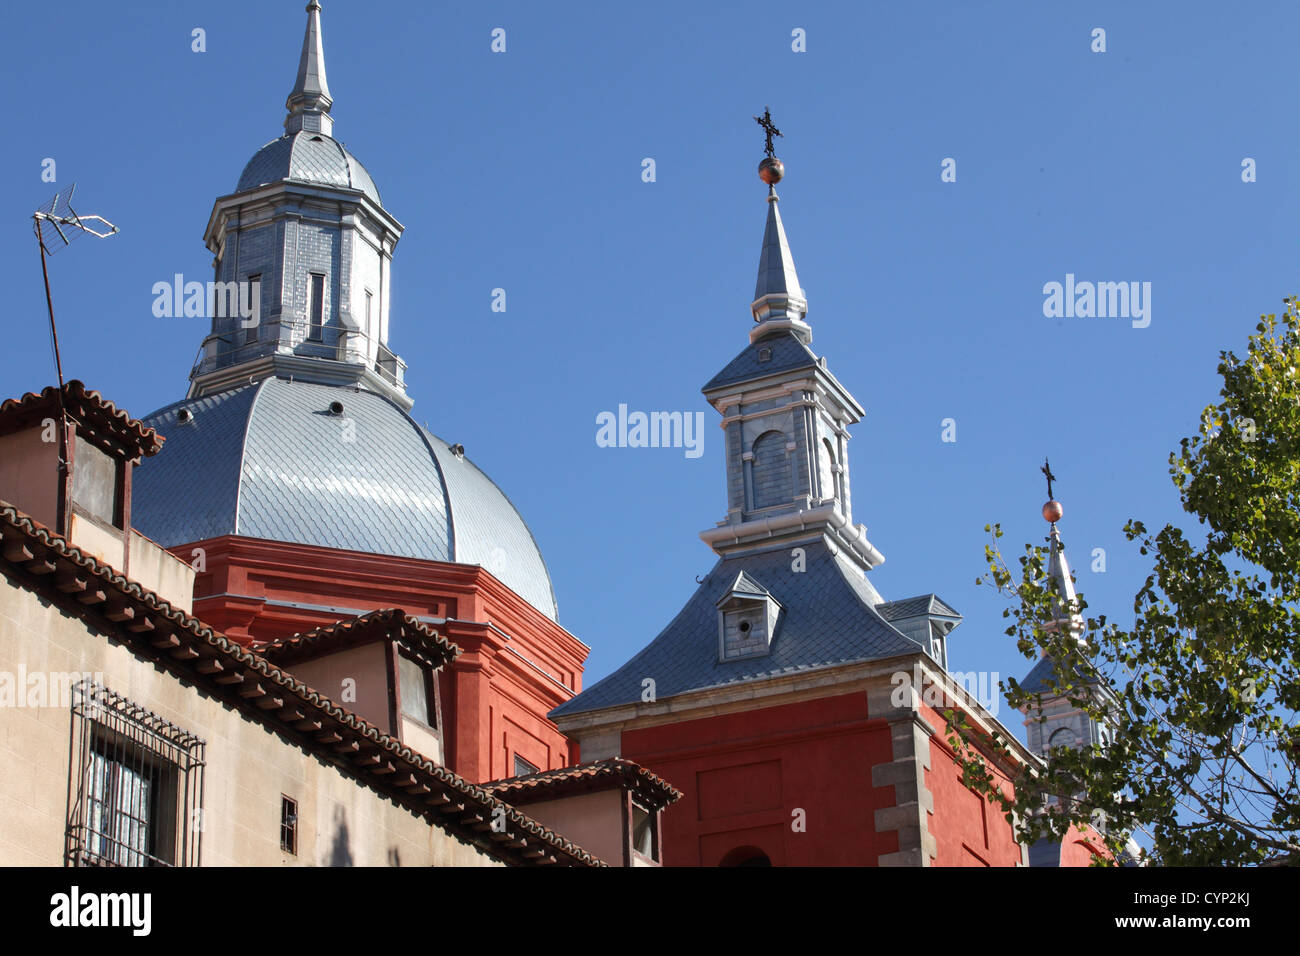 Historic traditional church Baroque roof tower detail red against blue sky, Madrid, Spain Stock Photo